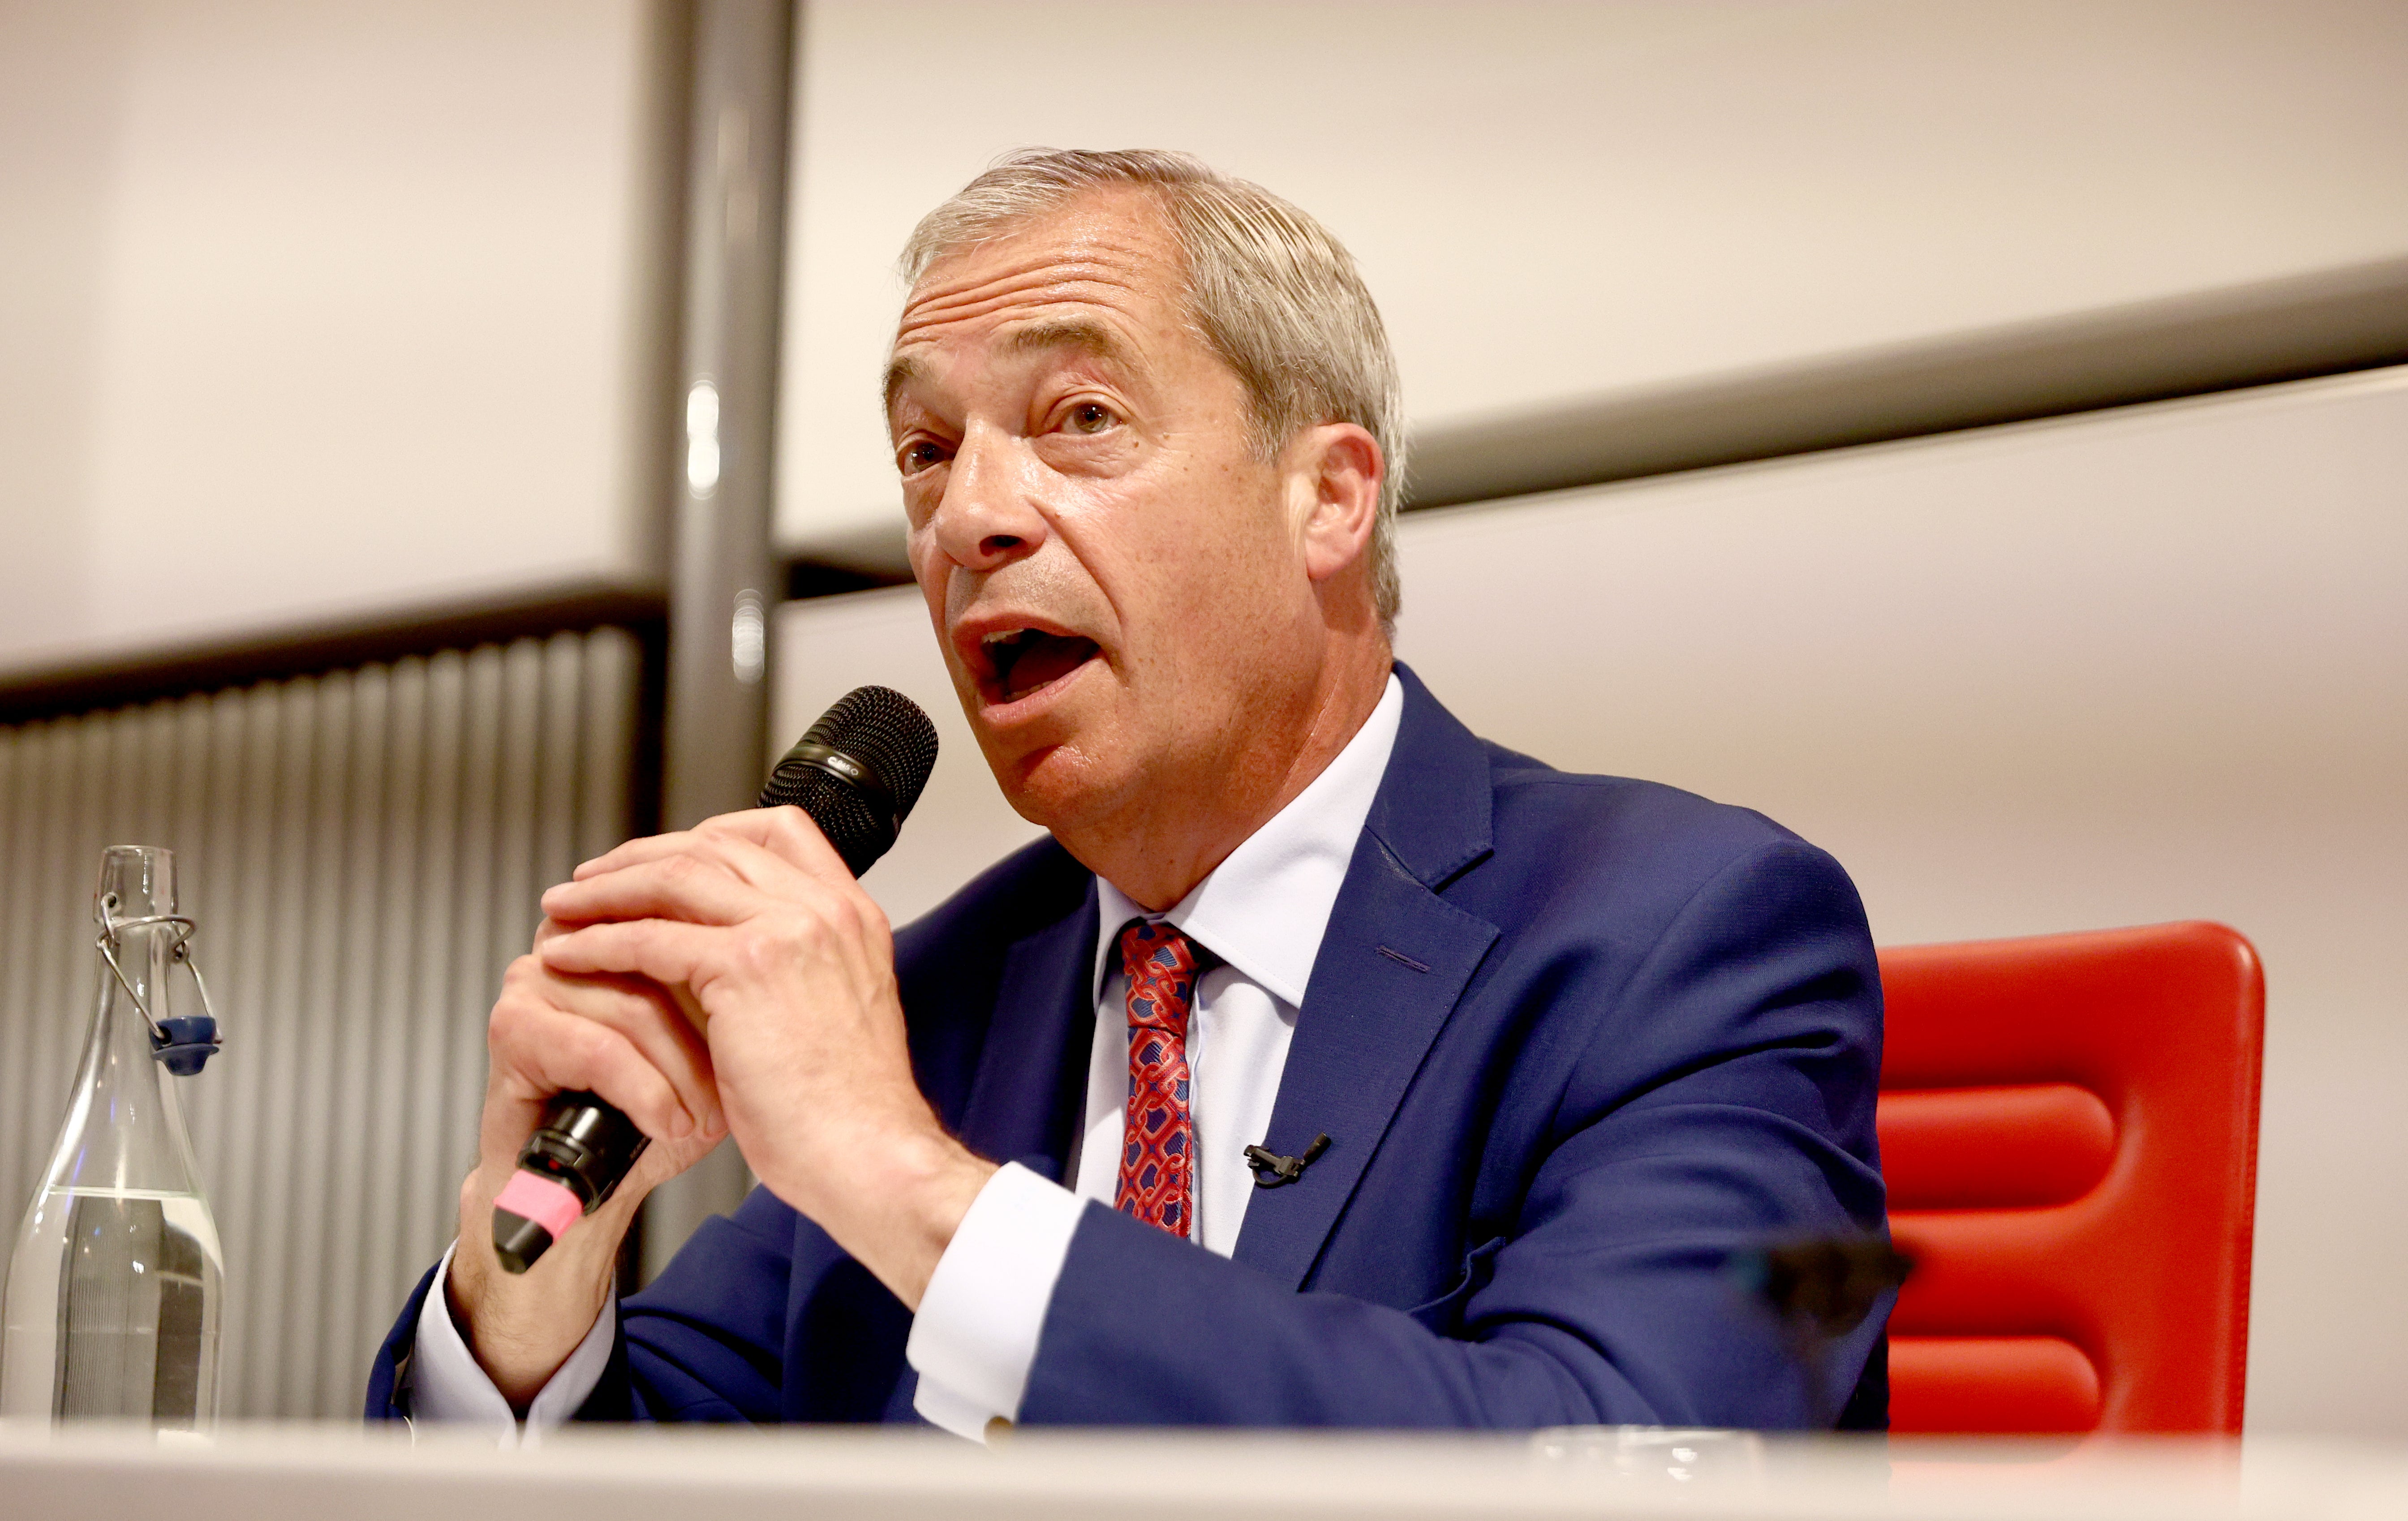 Reform UK leader and MP for Clacton, Nigel Farage, speaks during a press conference in Westminster, central London (Tejas Sandhu/PA)